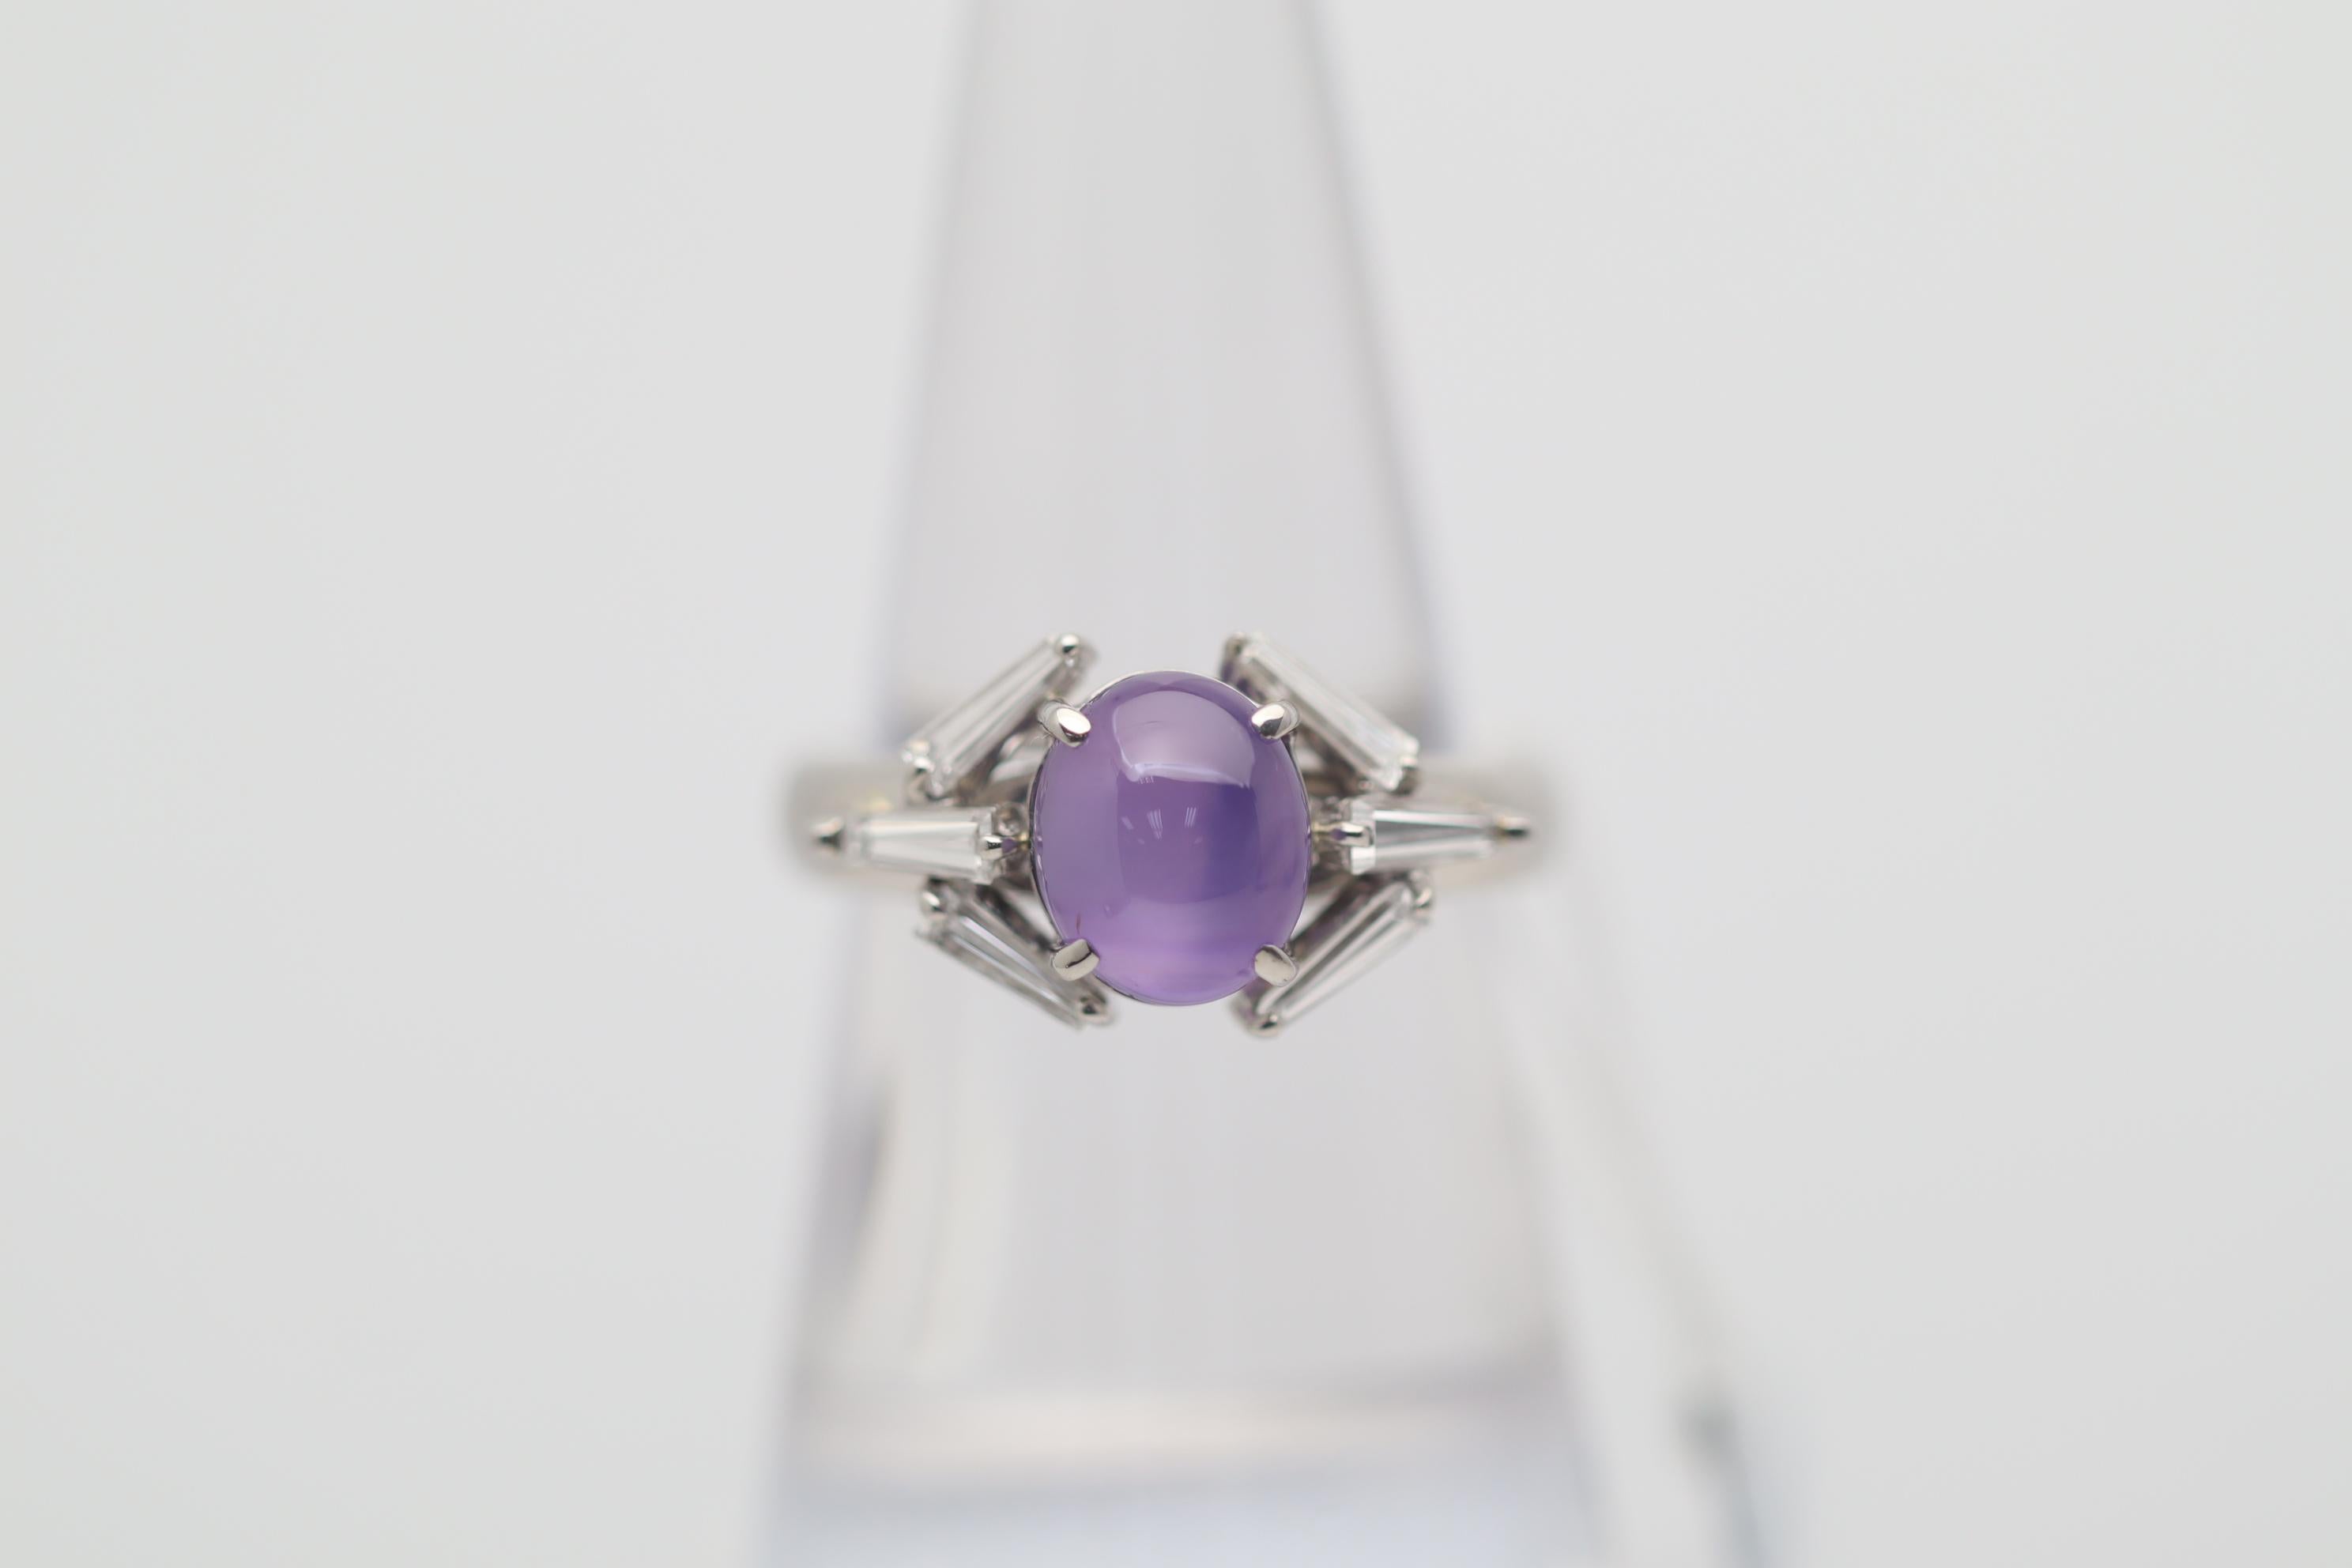 A chic and stylish geometric ring featuring a 3.87 carat star sapphire with a clean rich purple color. The sapphire has excellent clarity along with a strong 6-rayed star making the stone a true gem. It is complemented by 6 baguette-cut diamonds